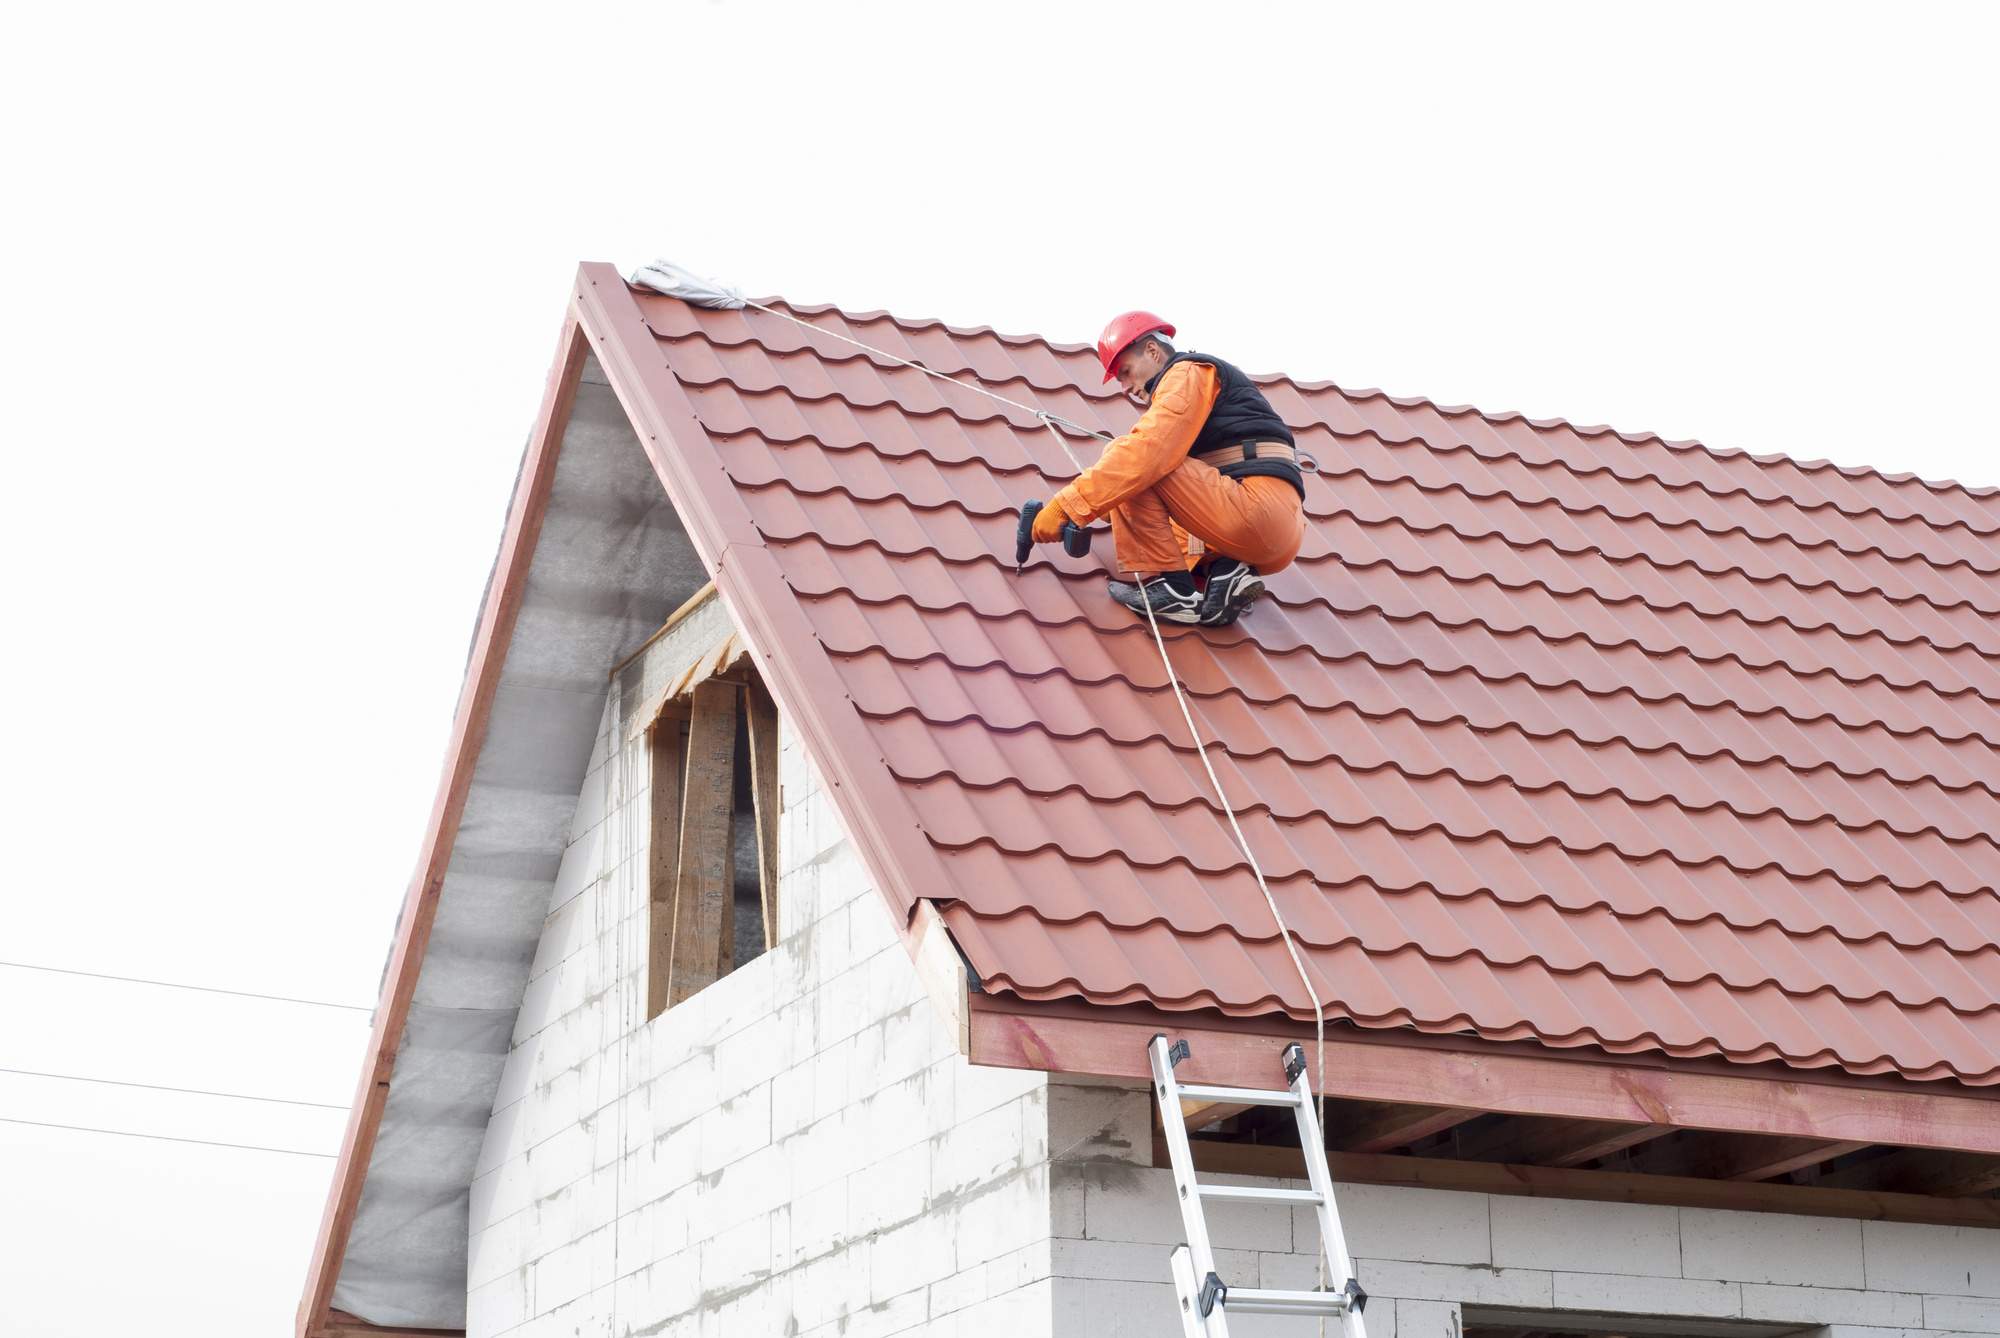 What Is the Average Lifespan of a Roof?